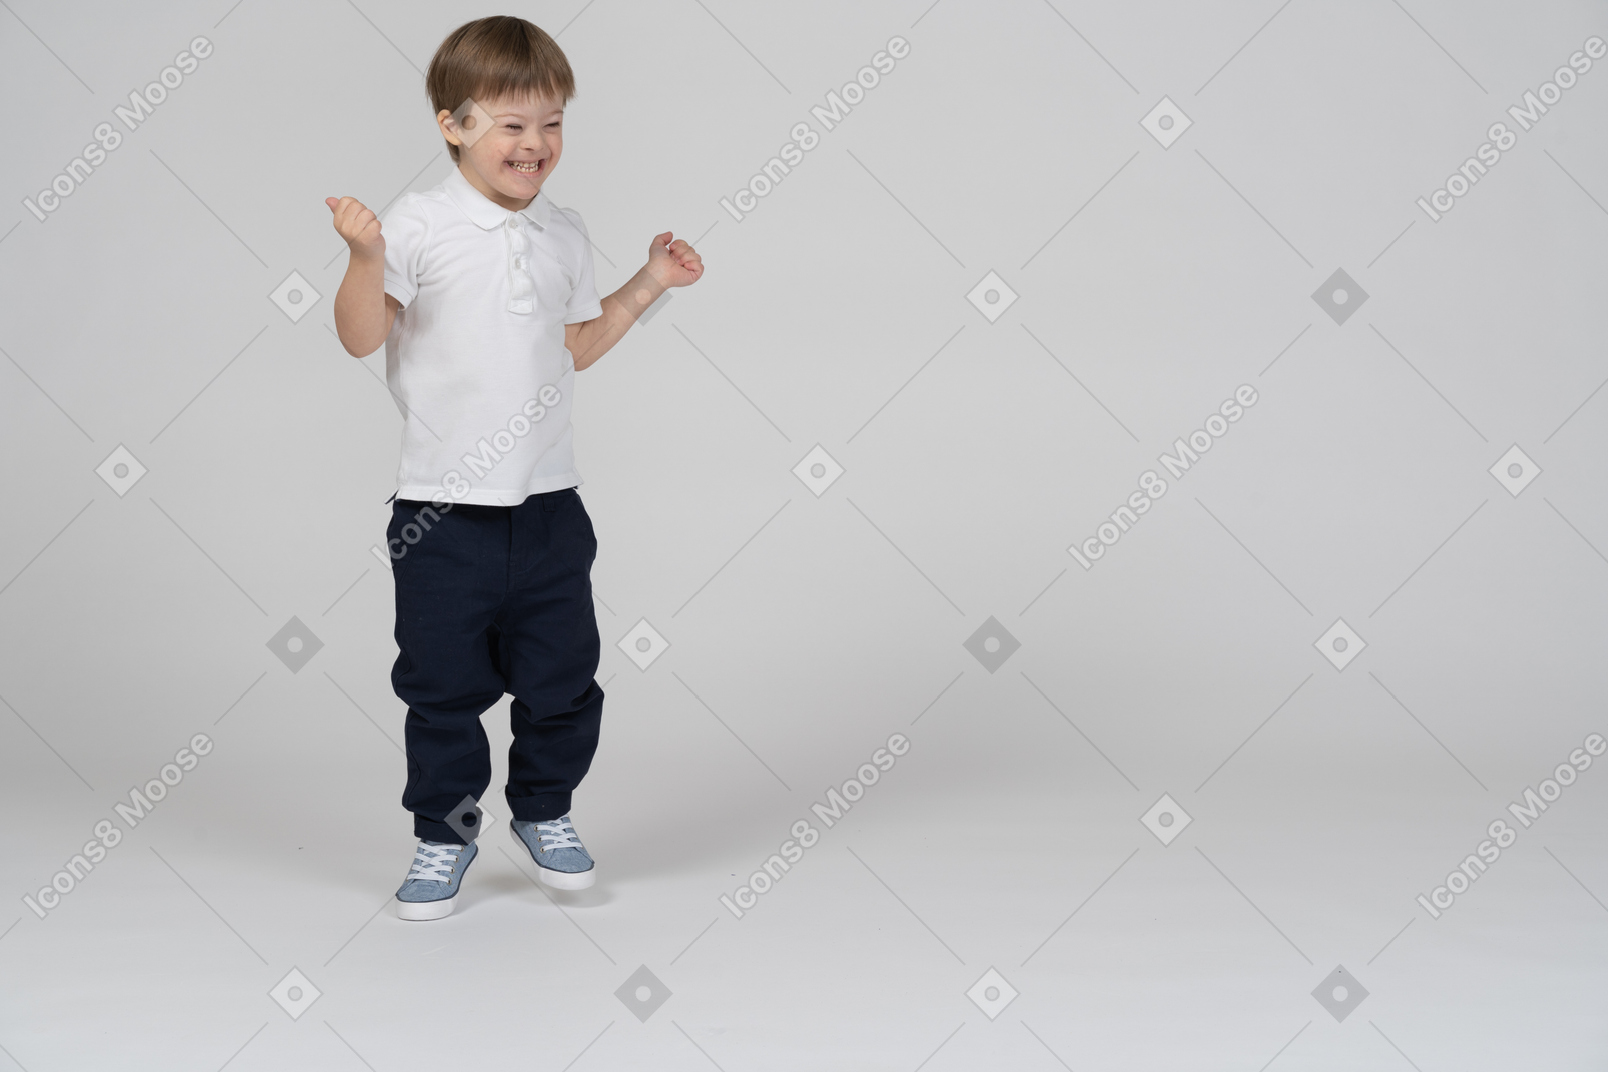 Front view of a boy jumping and smiling happily